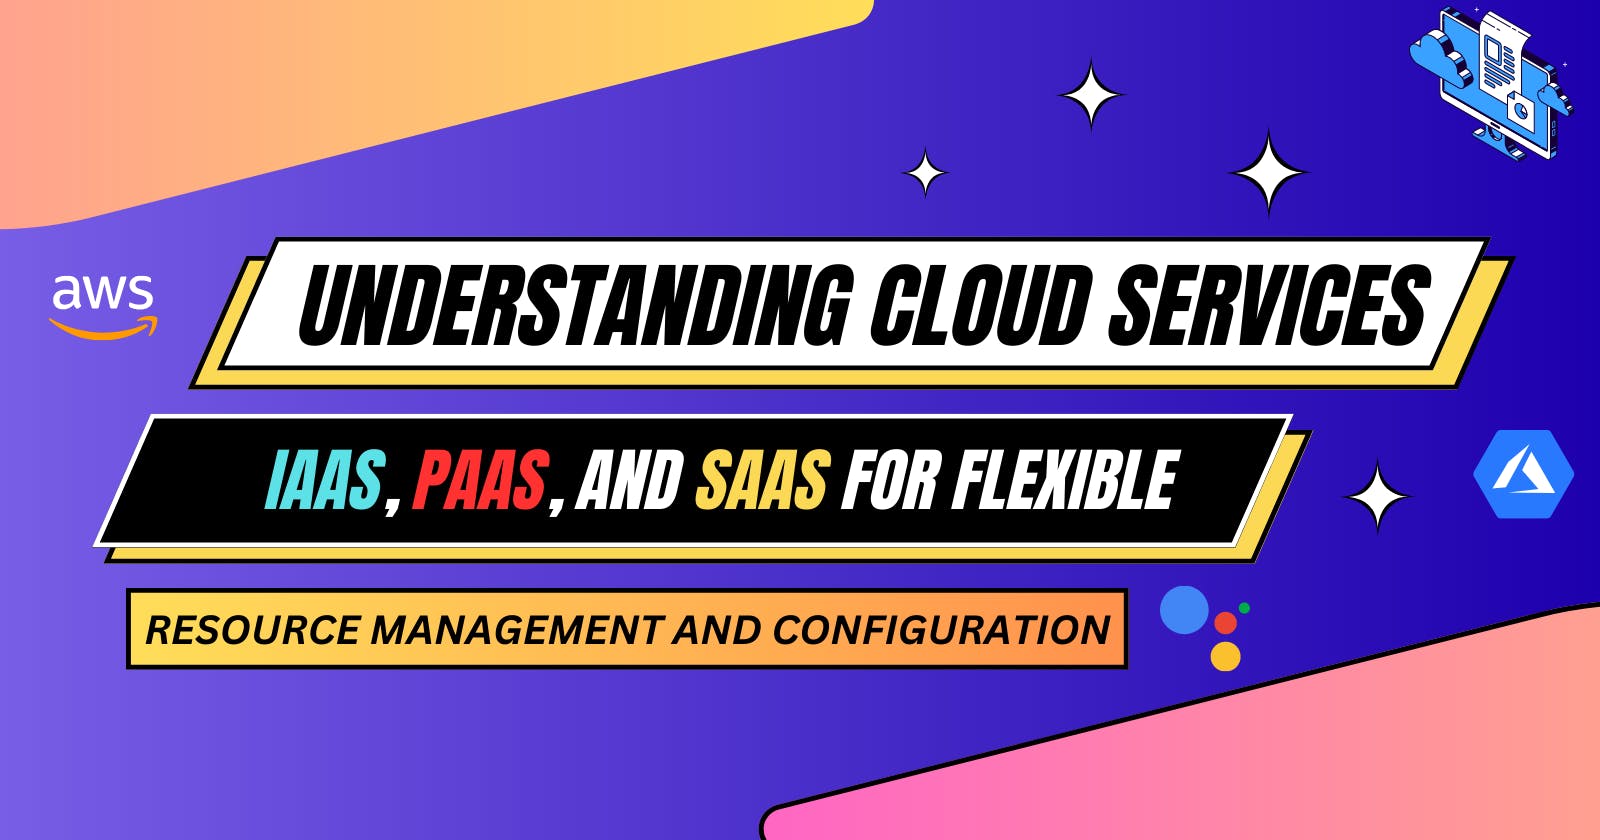 Understanding Cloud Service Types: IaaS, PaaS, and SaaS for Flexible Resource Management and Configuration